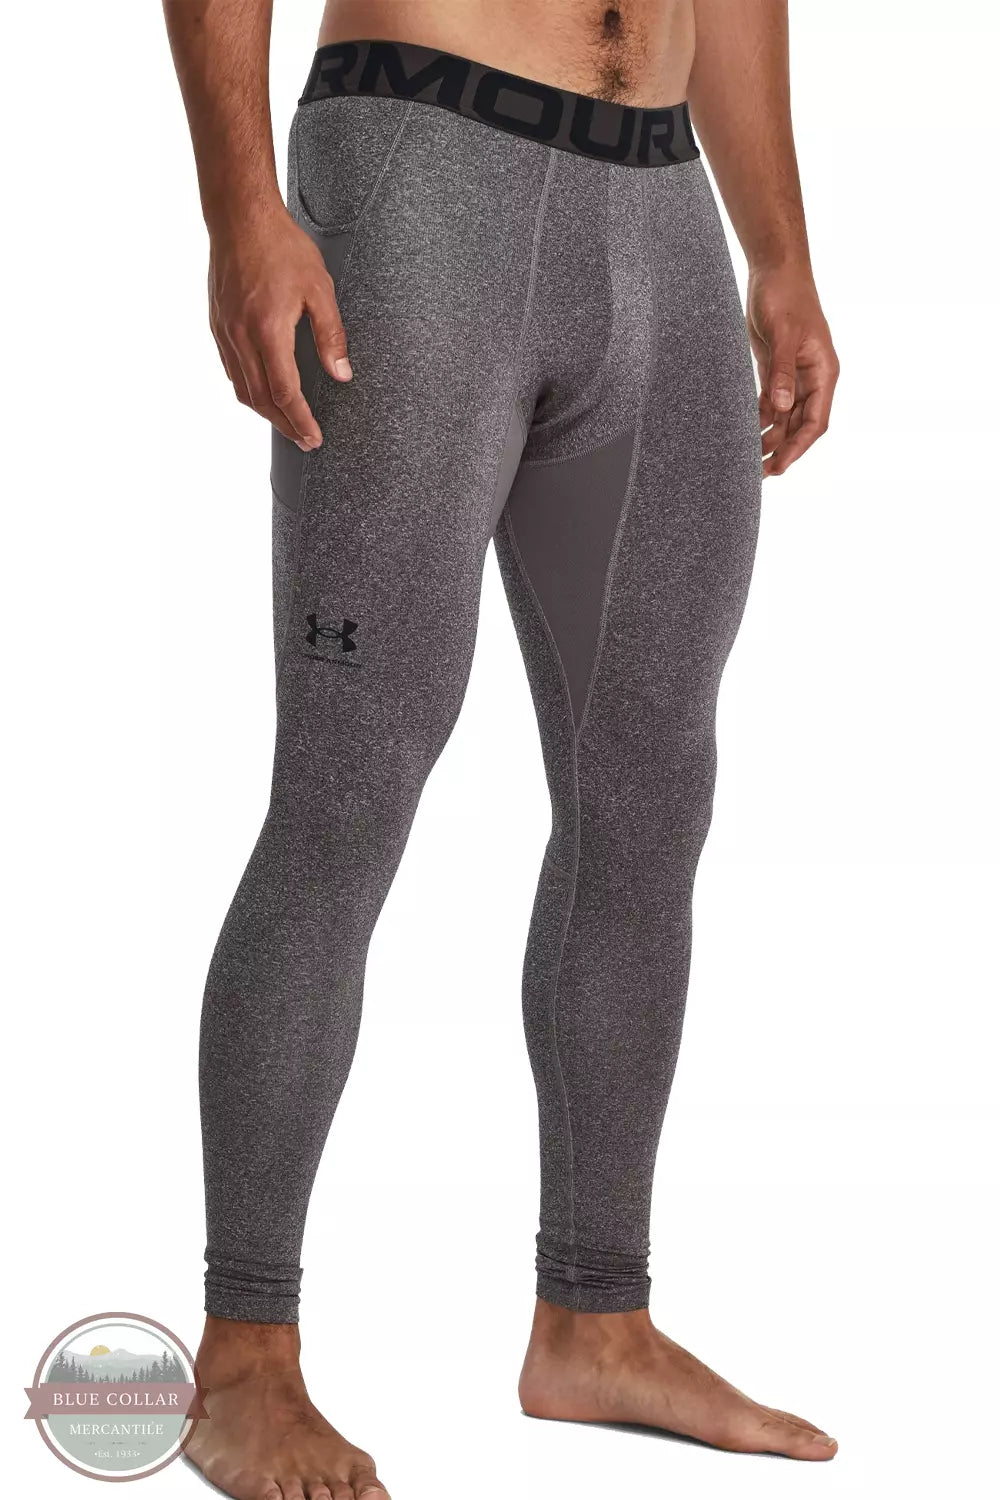 Under Armour 1366075-020 ColdGear Charcoal Light in Heather / Black Leggings